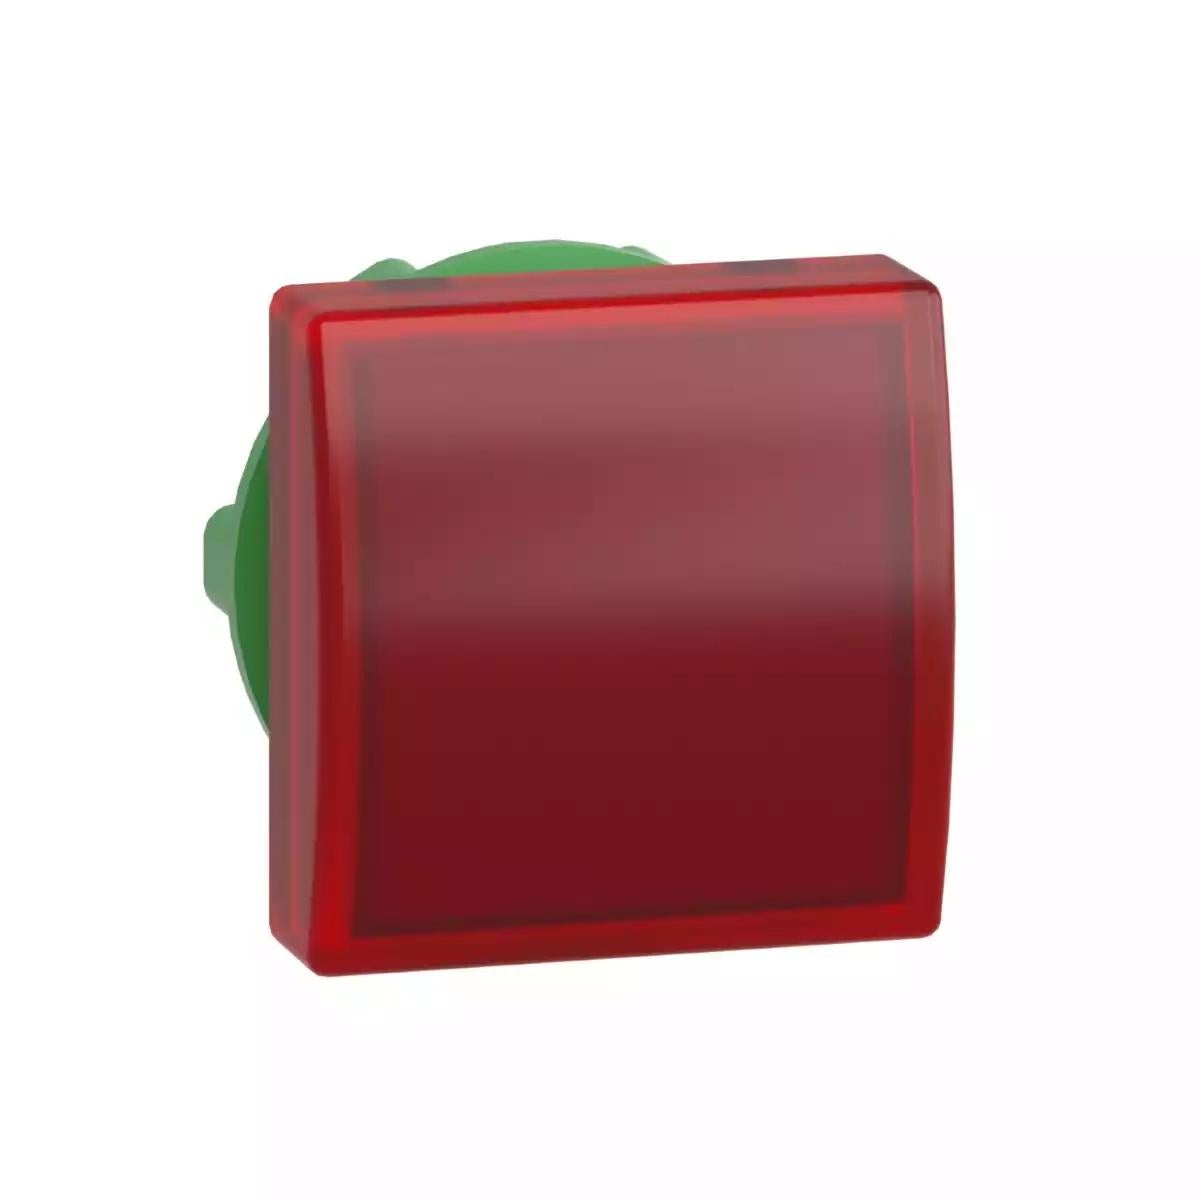 Head for pilot light, Harmony XB5, square red, 22mm, with plain lens, universal LED